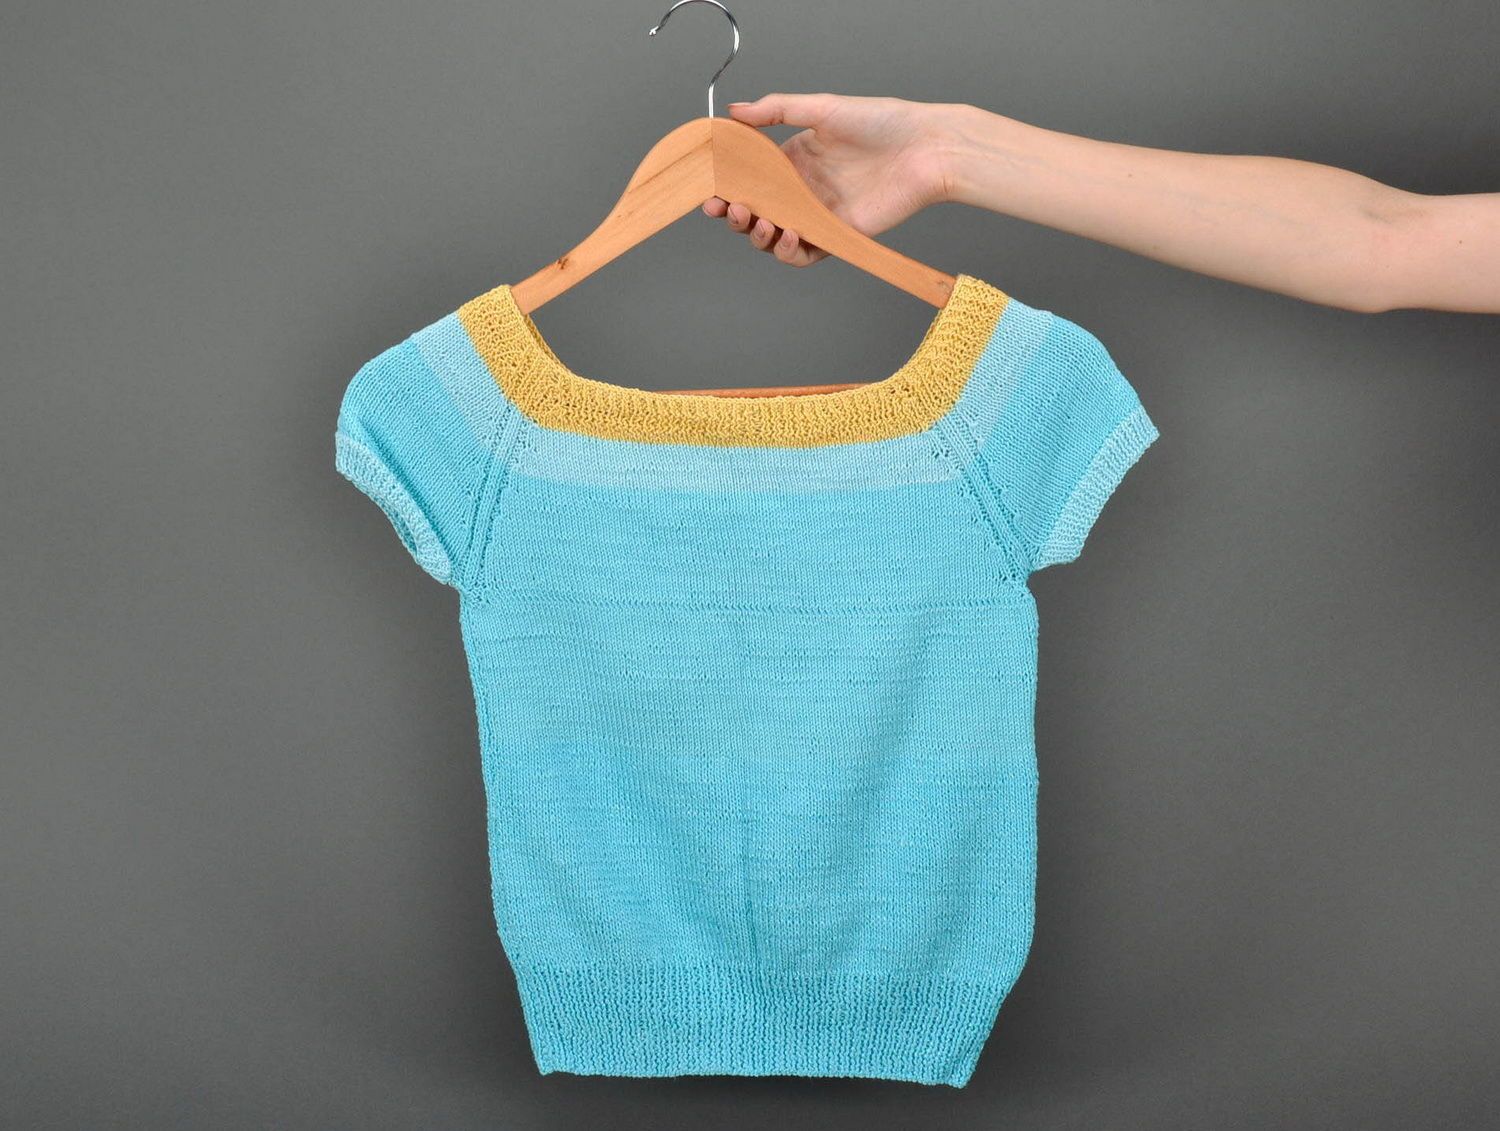 Children's sweater knitted with needles photo 5